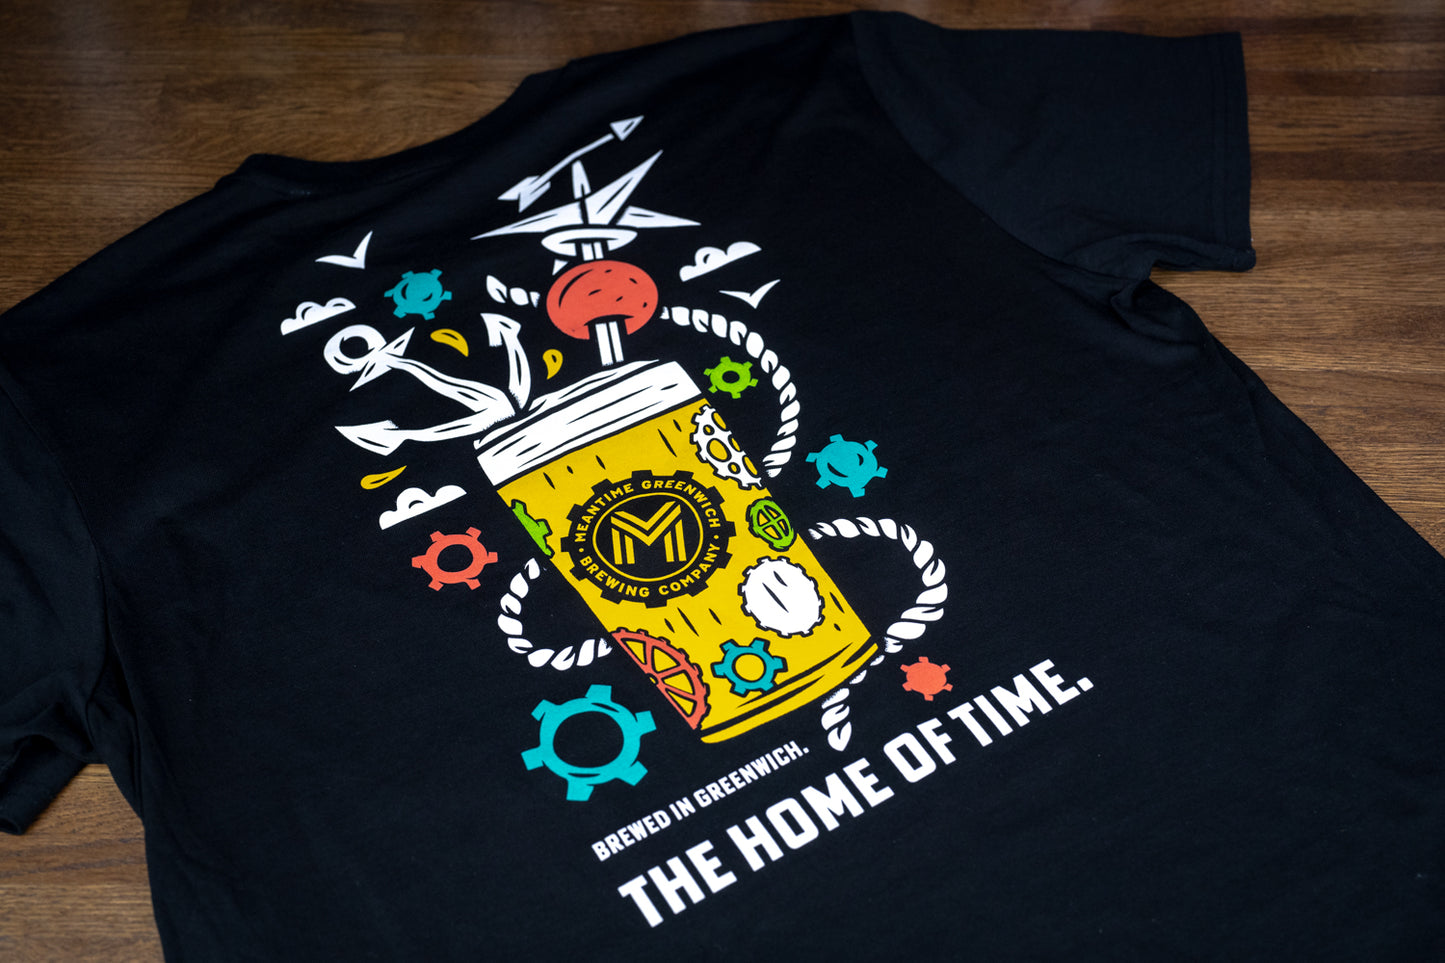 Meantime The Home of Time T-Shirt